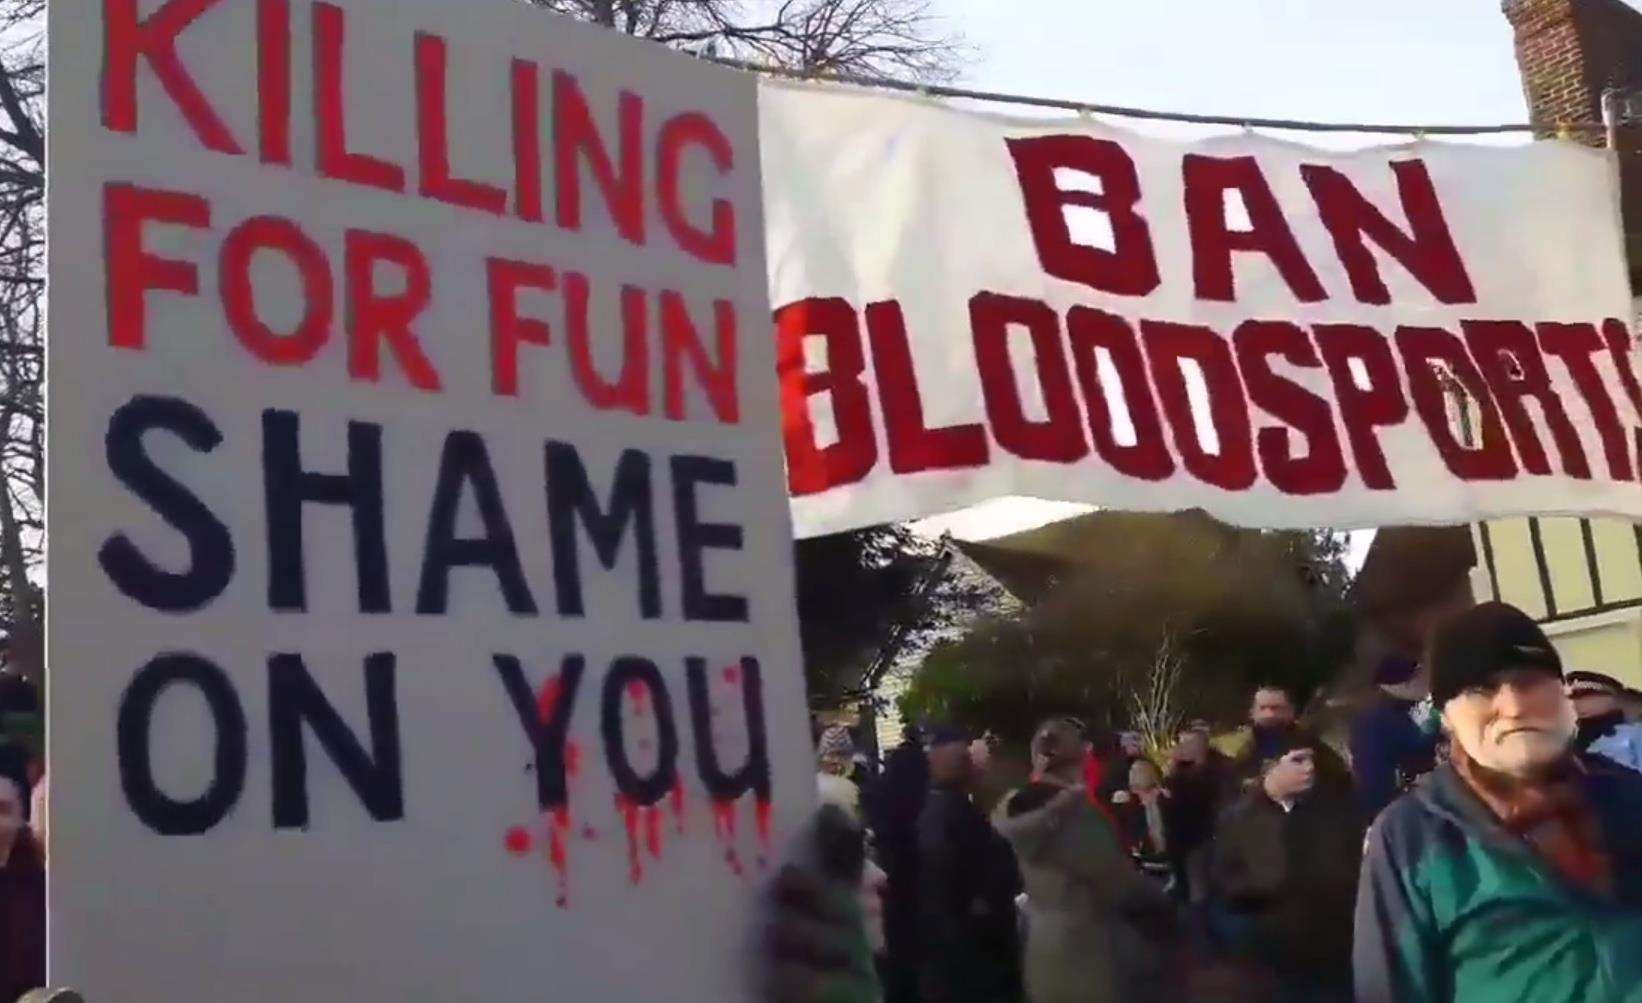 Protestors have claimed victory after fox hunters with no longer gather in the village square